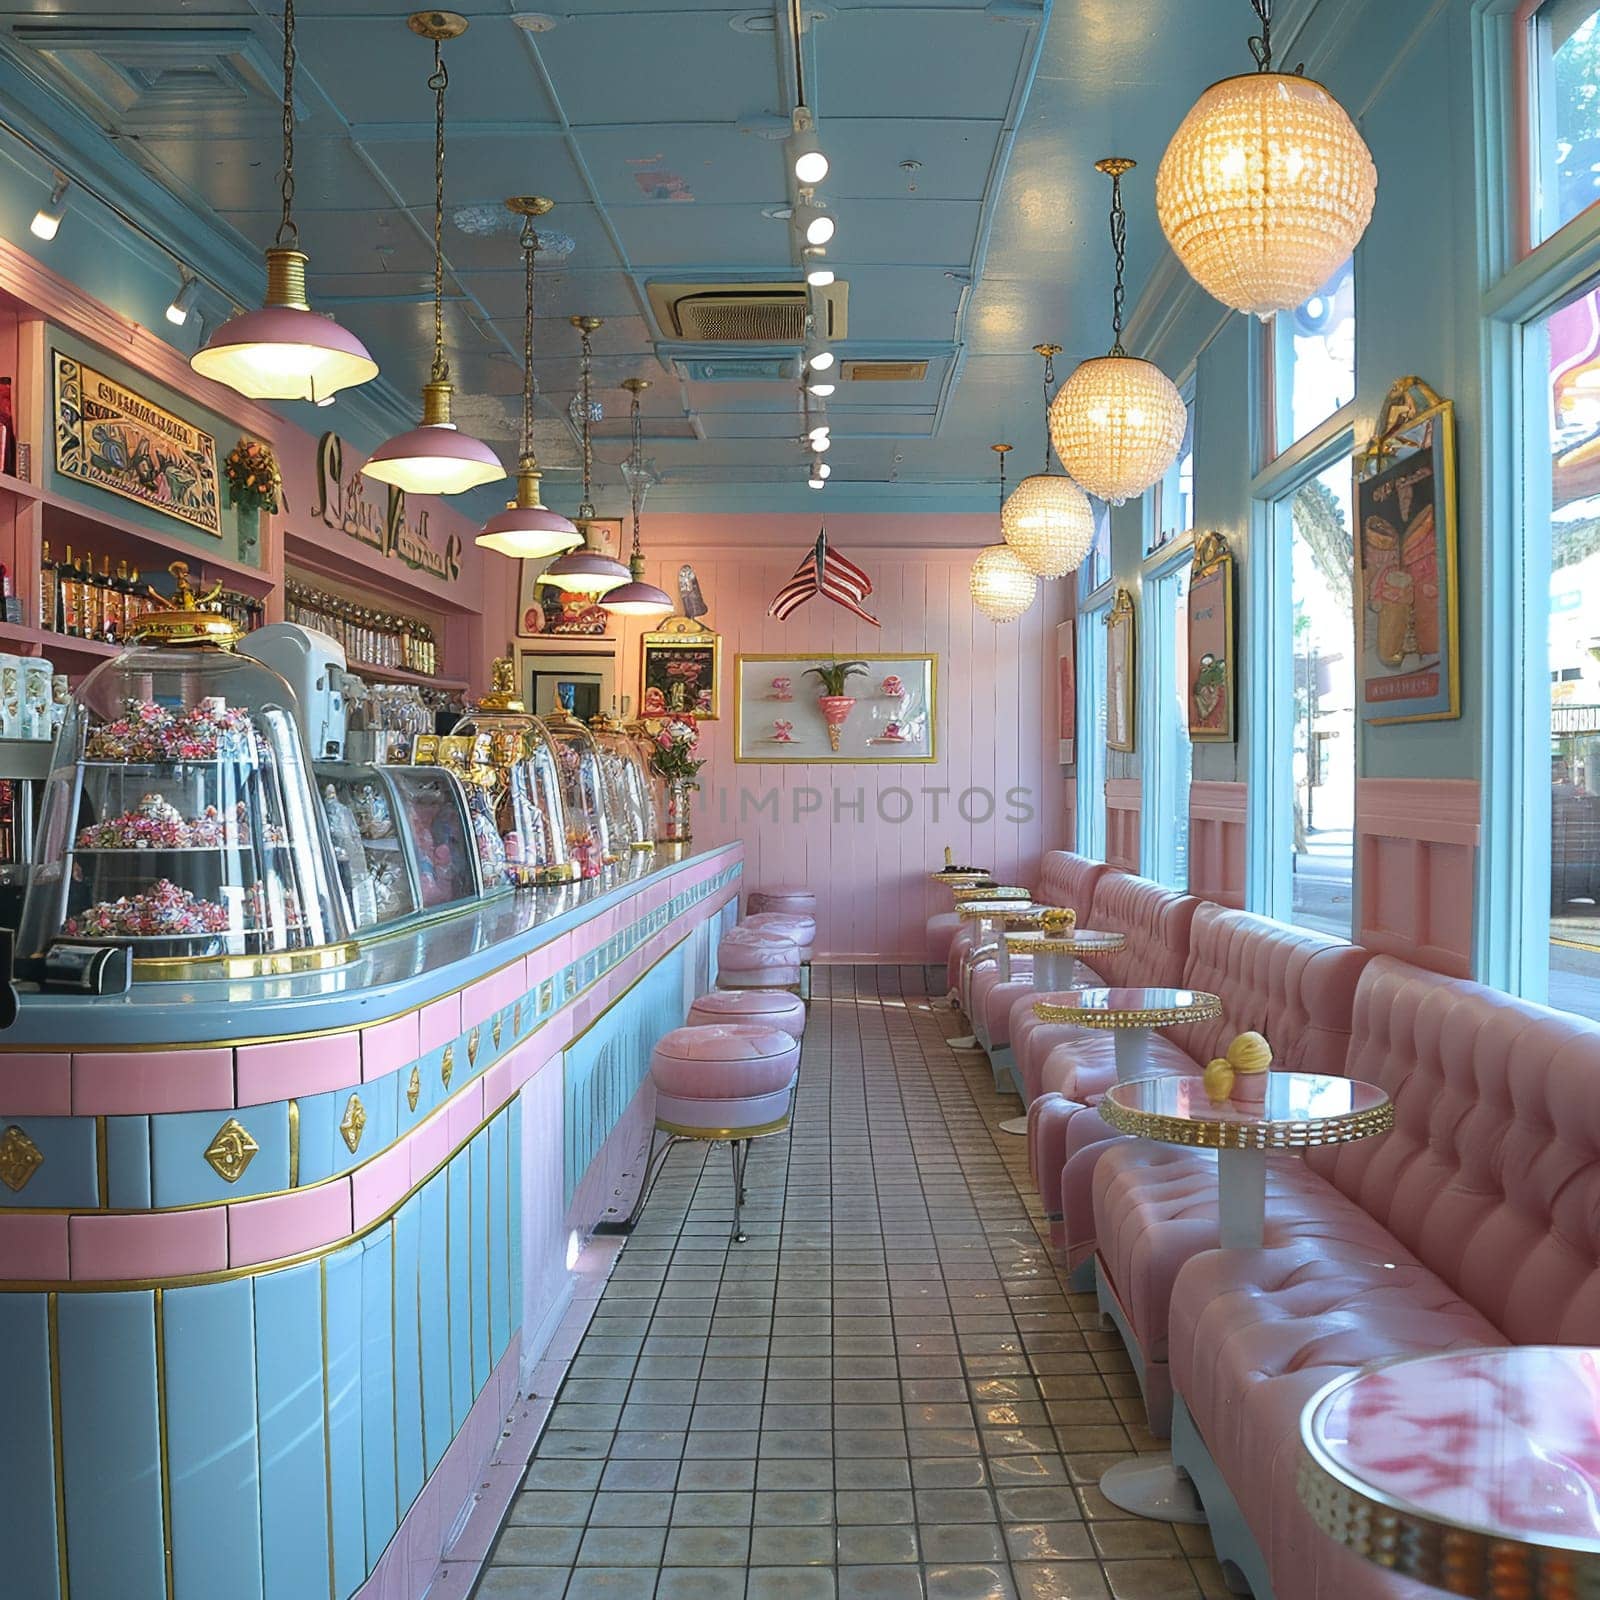 Whimsical ice cream parlor with pastel colors and vintage decor